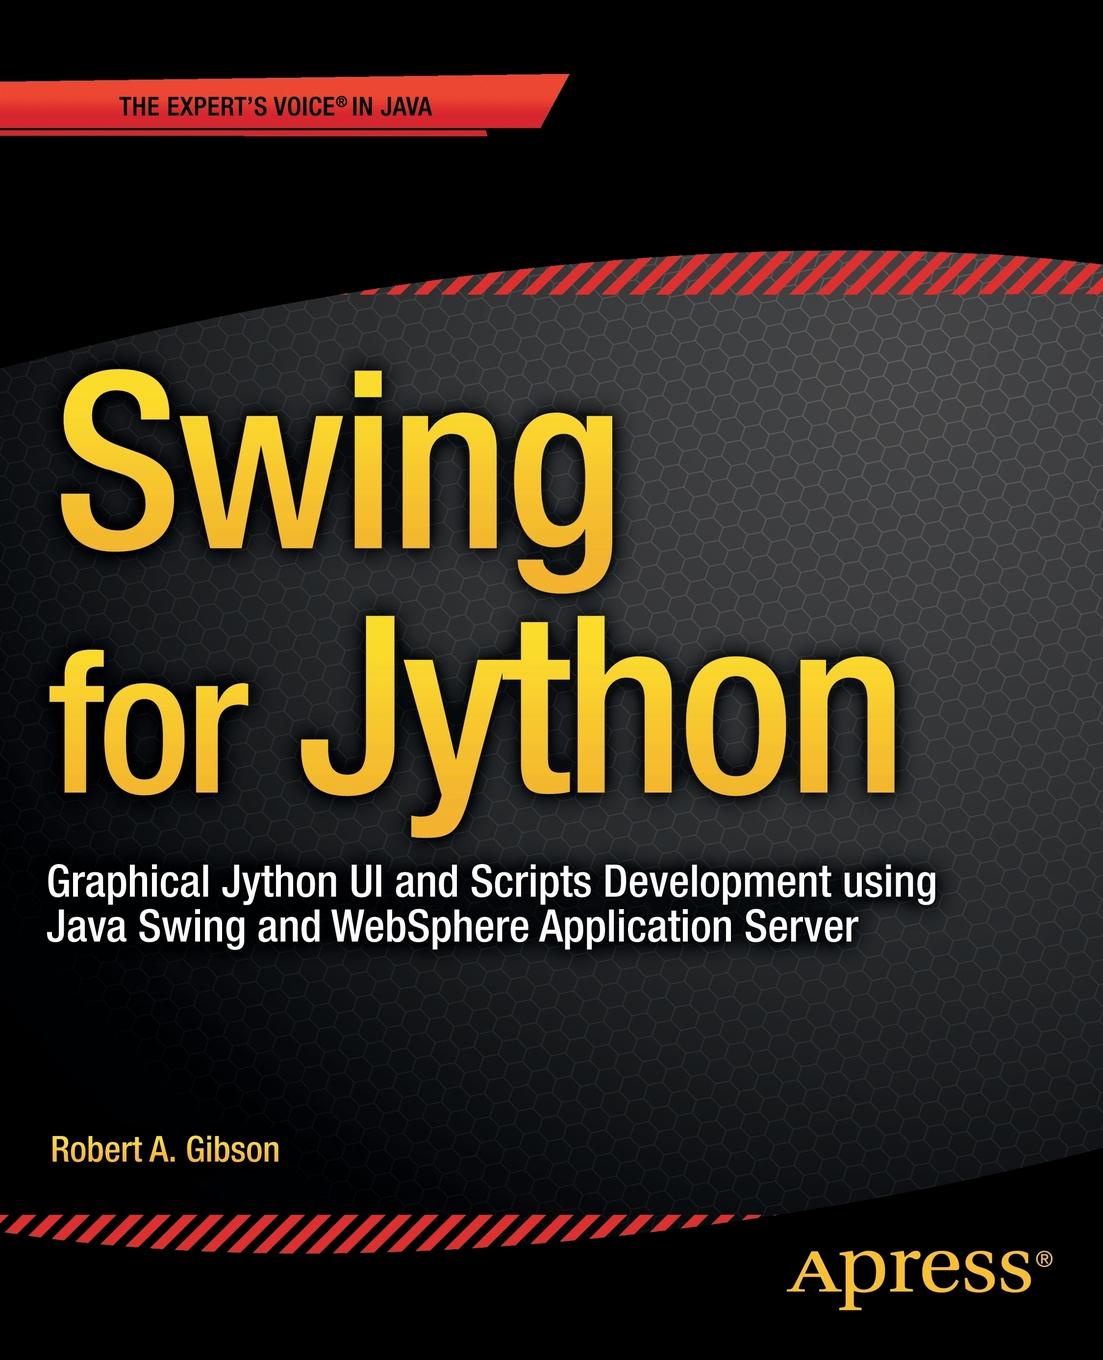 Swing for Jython. Graphical Jython UI and Scripts Development using Java Swing and WebSphere Application Server